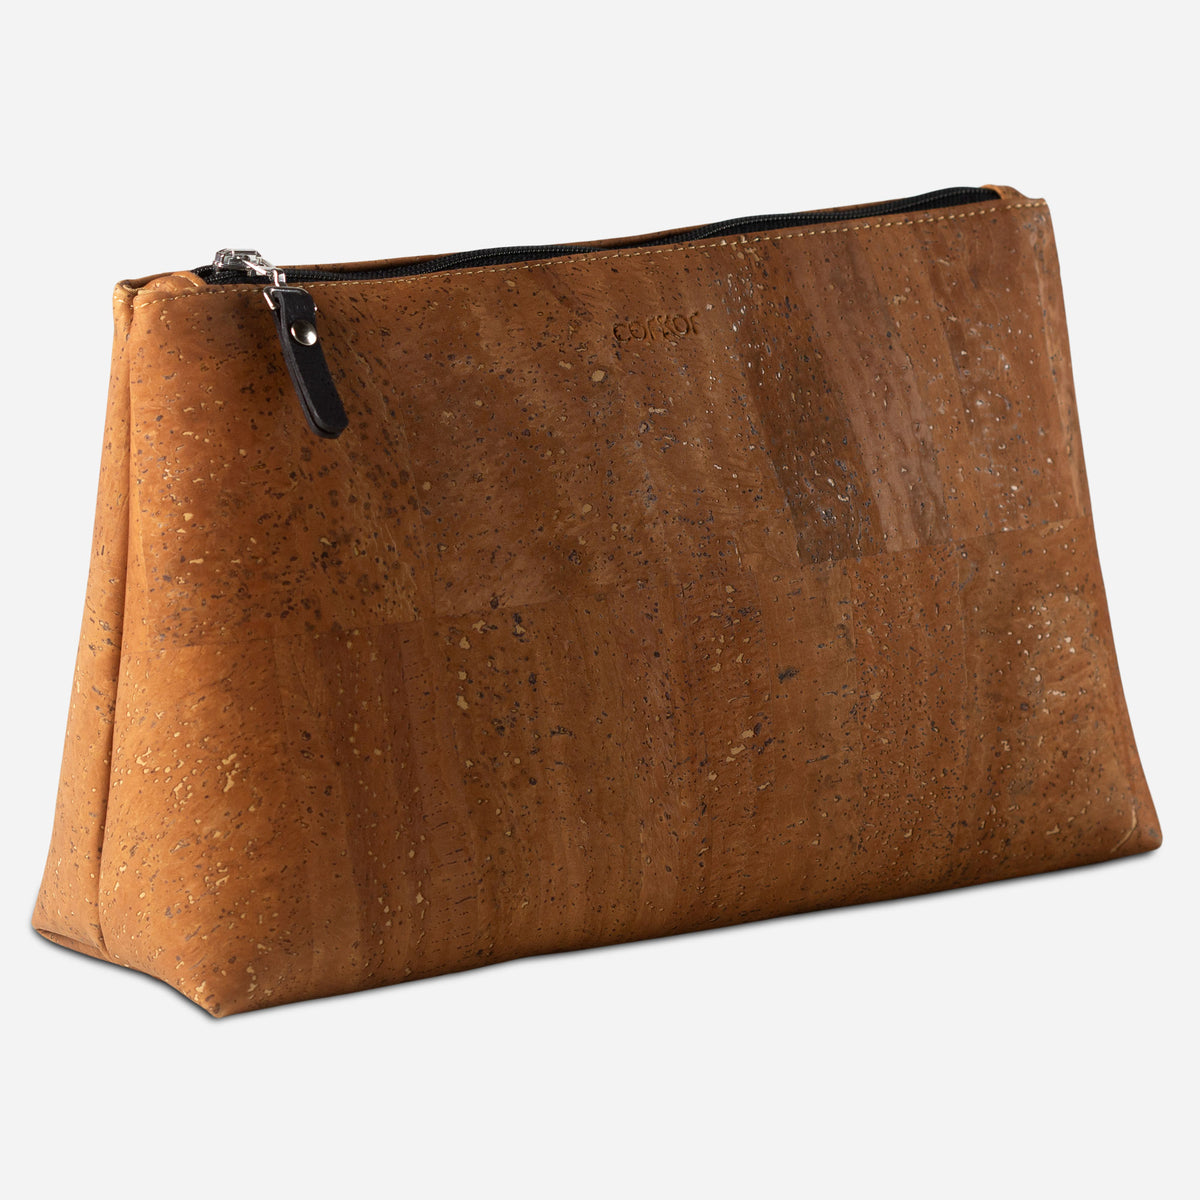  Carry-All Makeup Bag in Natural Cork with Dashes of